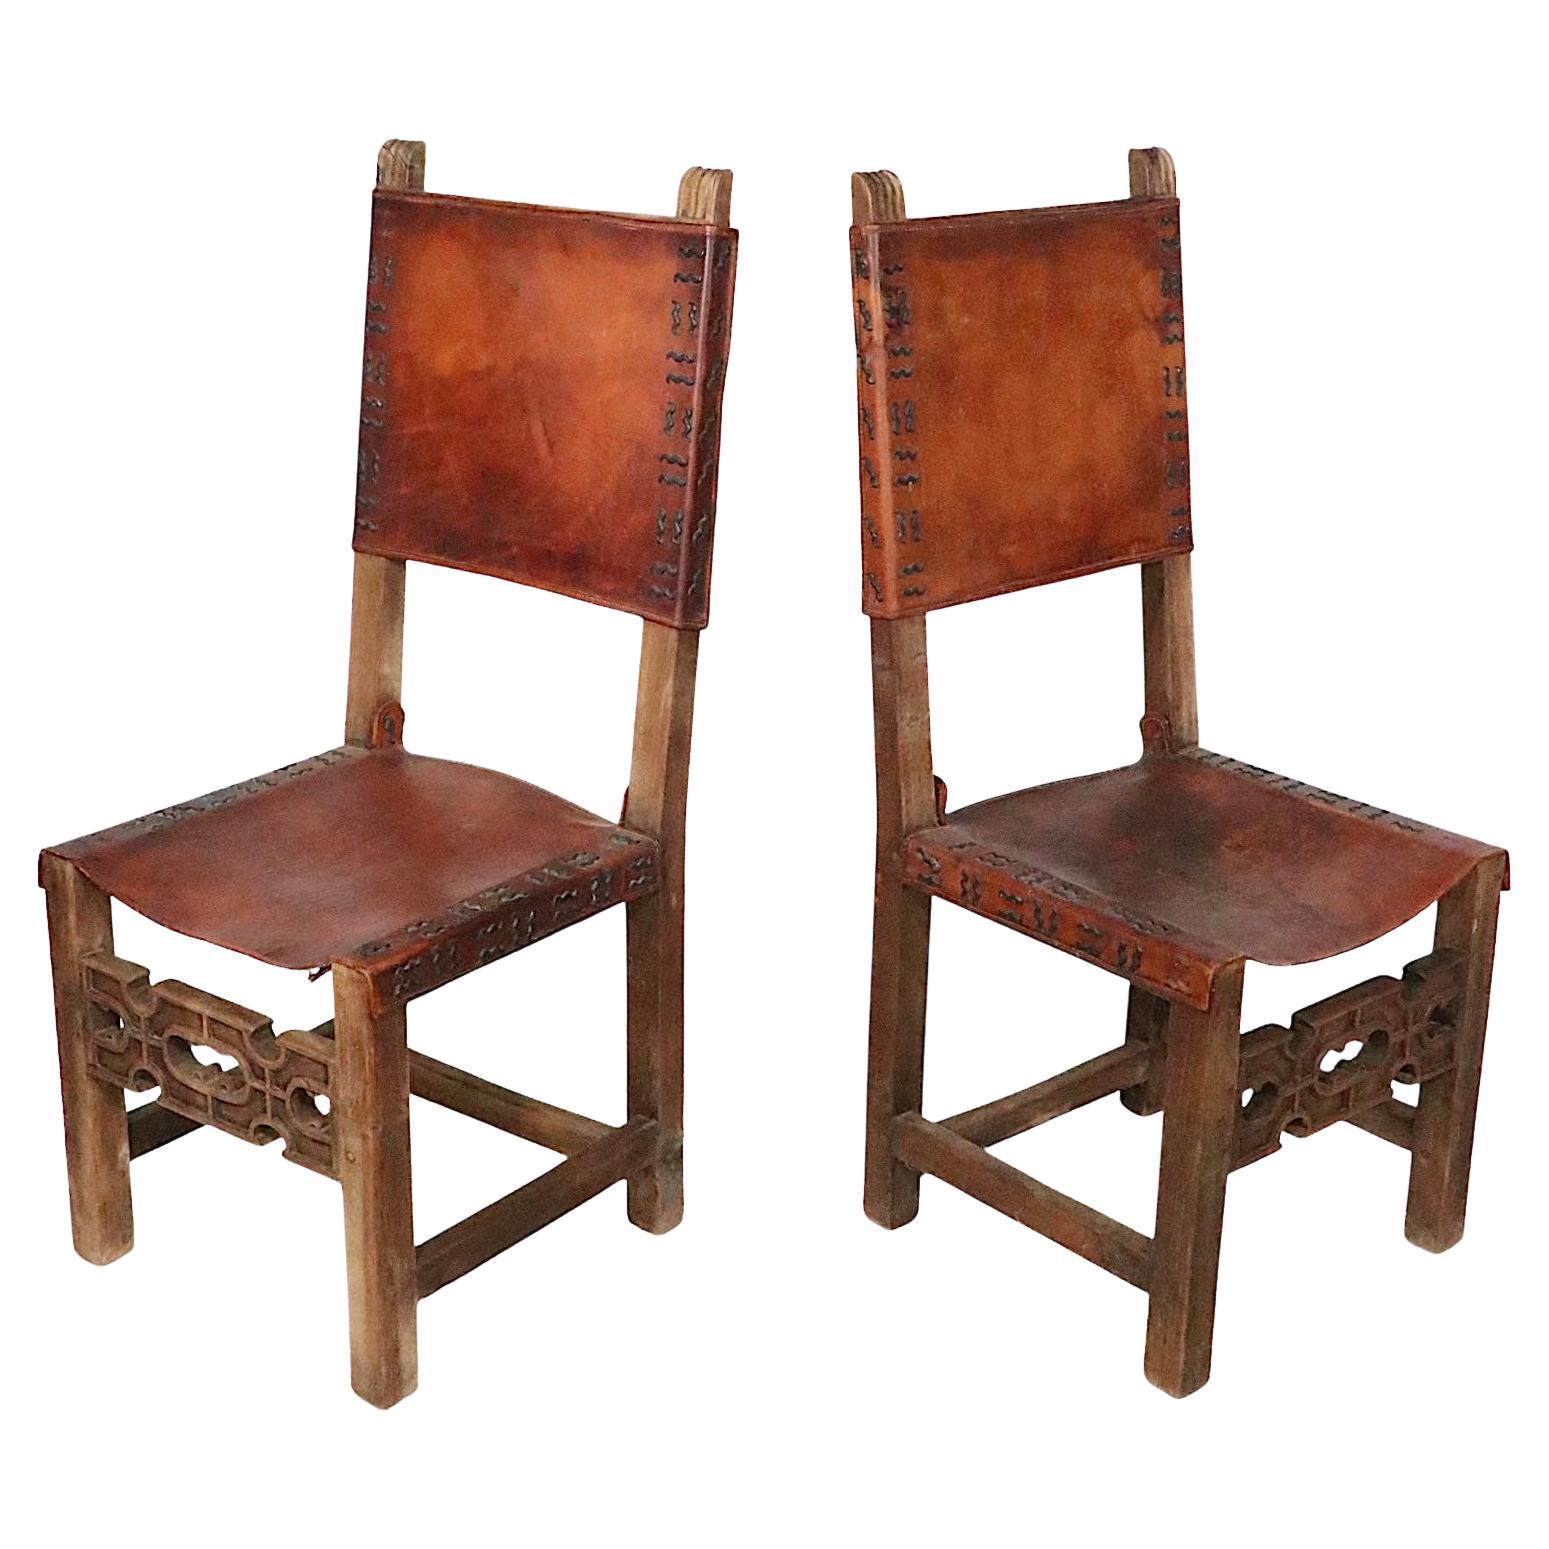 Antique Spanish Leather and Wood Dining Chairs For Sale